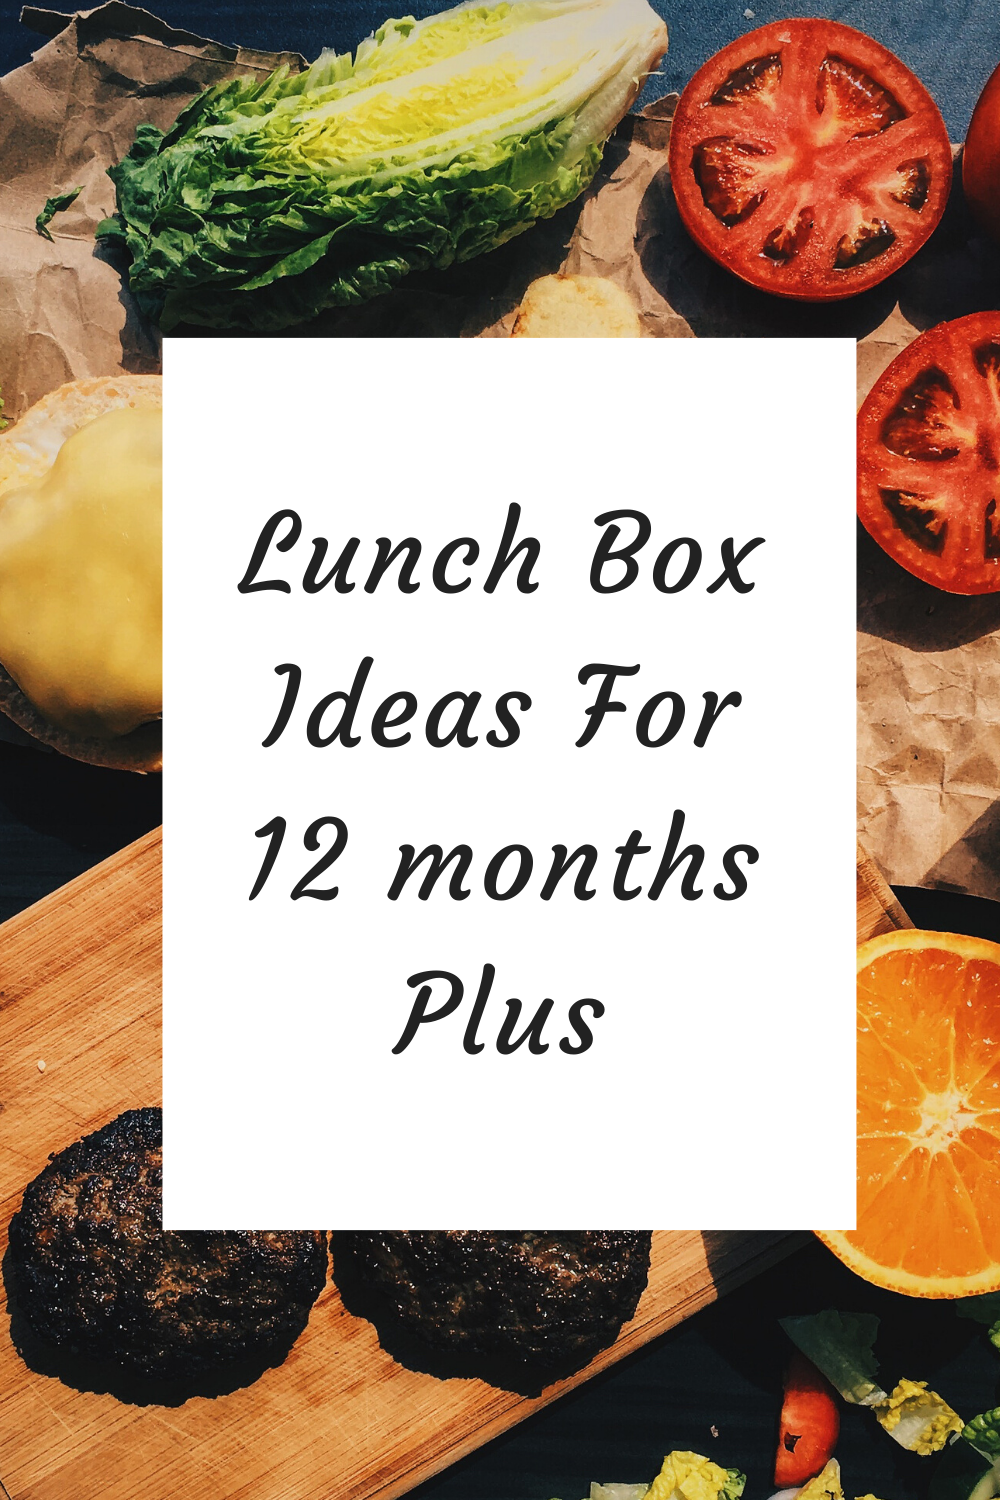 Toddler lunch box ideas for 12 months +, here are some easy recipes suitable for freezing so you can be prepared. Organix baby food review